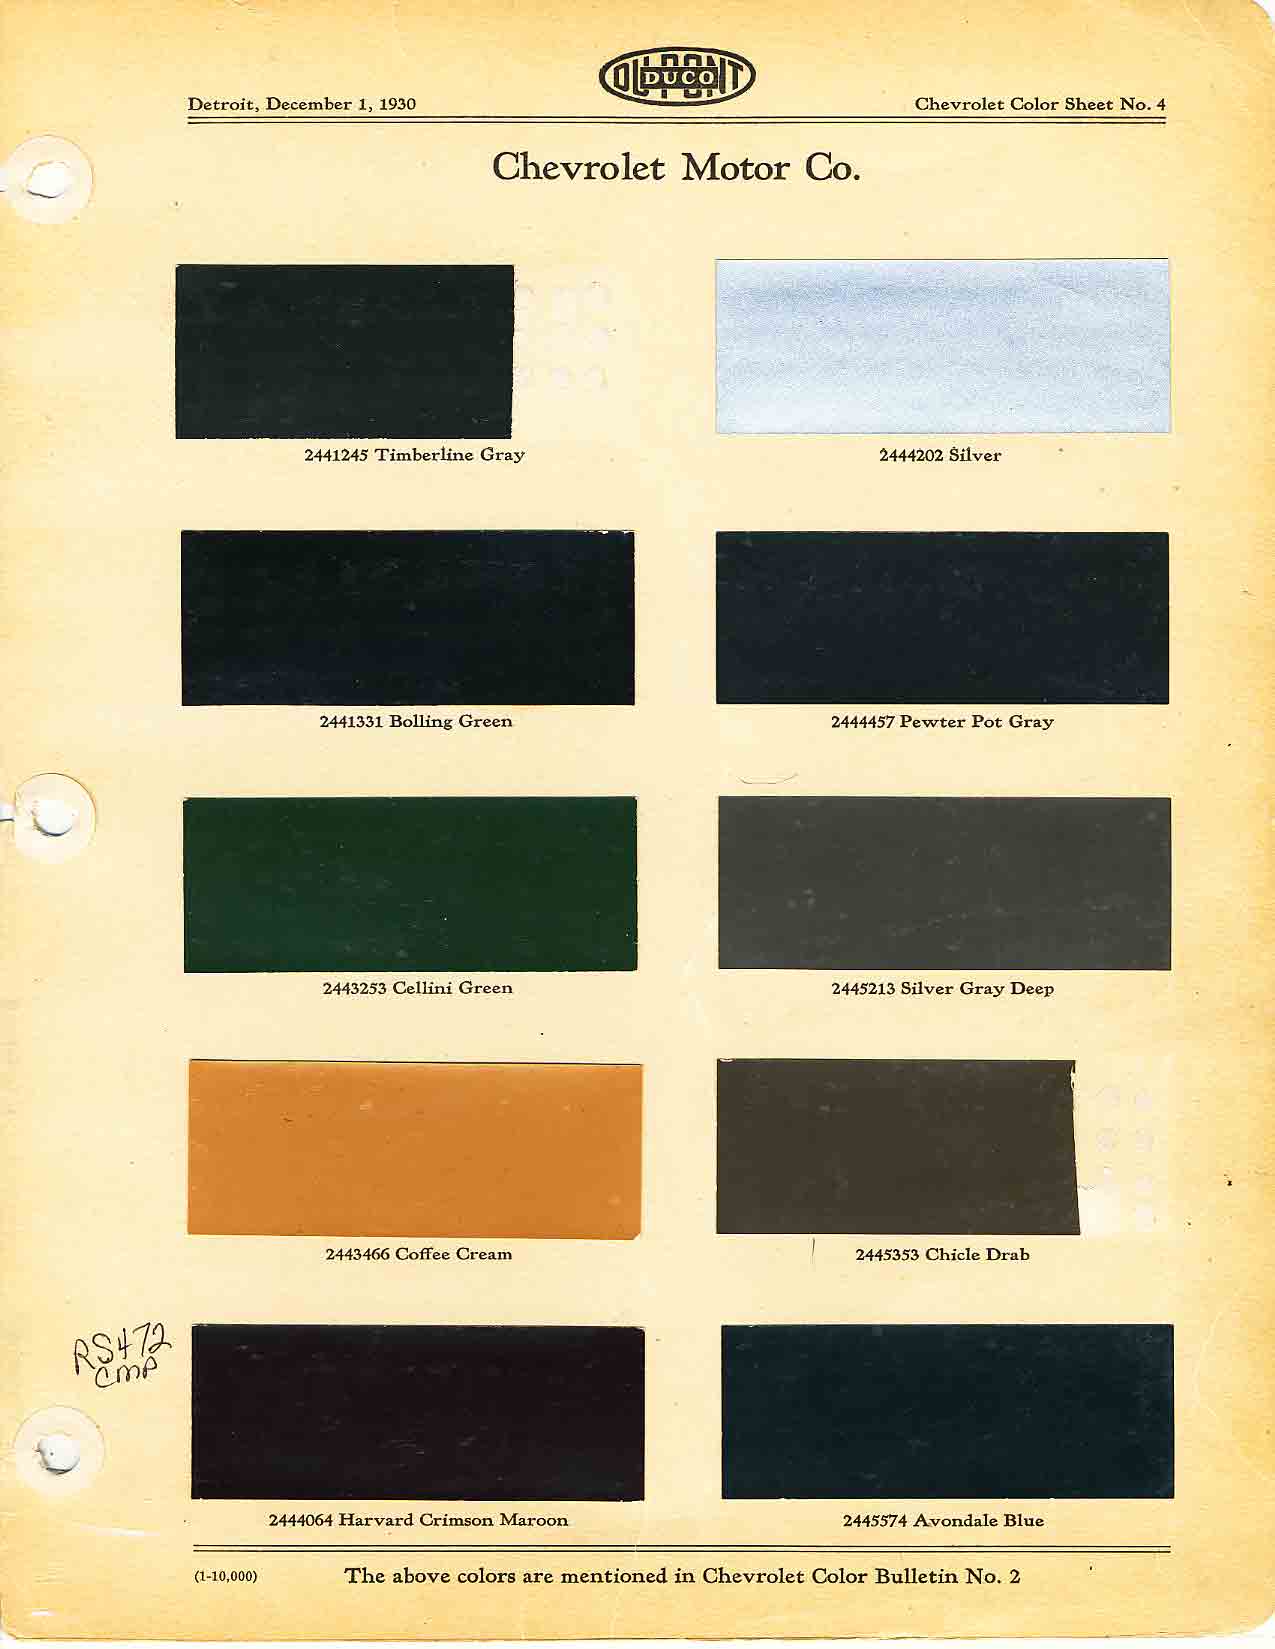 Colors and codes used on Chevrolet Vehicles in 1931